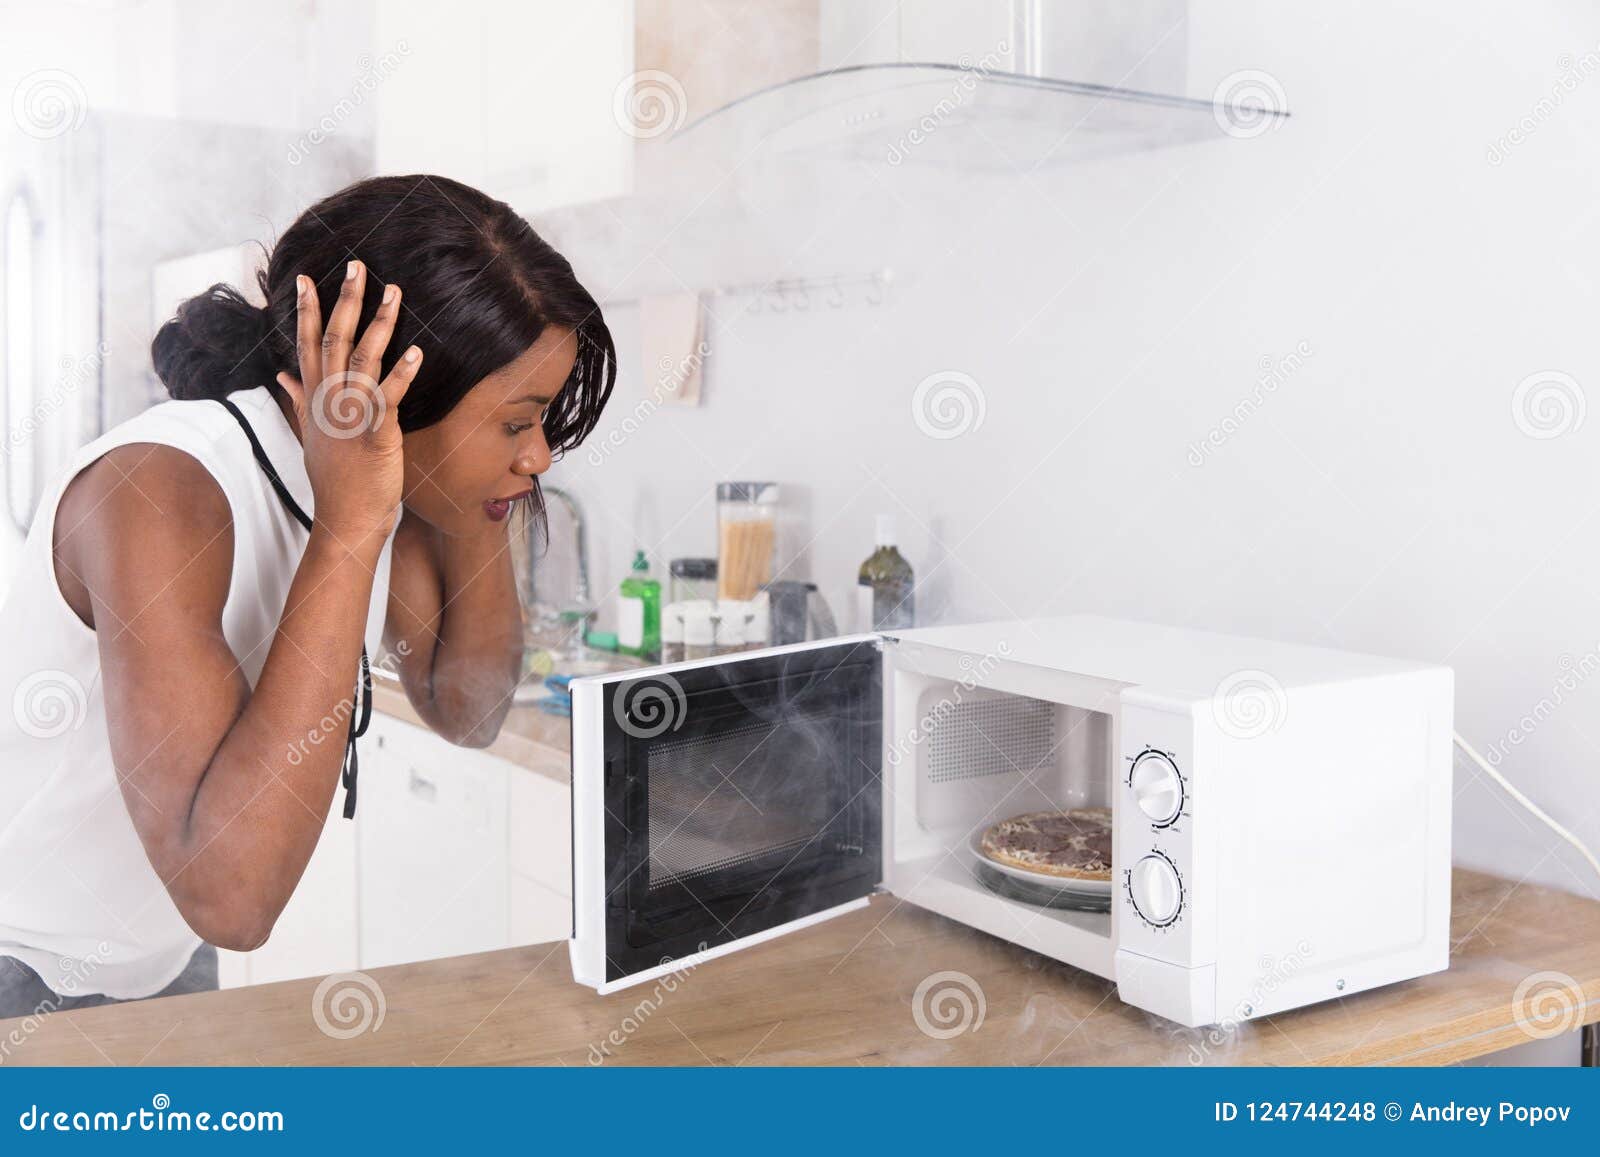 Free Photos - In This Stock Photo, A Young Woman With A Melancholic  Expression Is Standing Next To An Old, Dusty Microwave Oven In A Dimly Lit  Room. The Woman Seems To